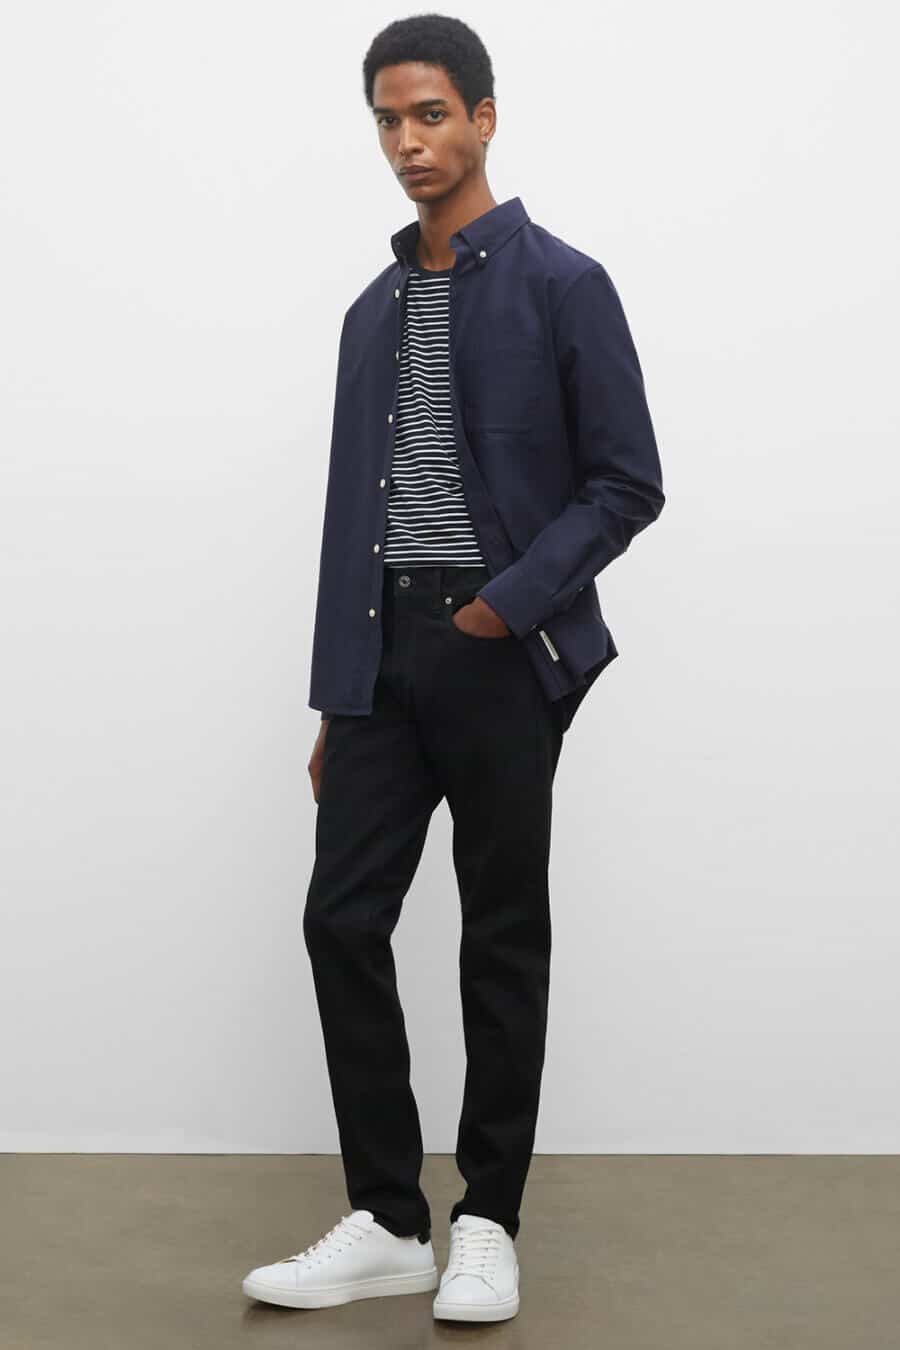 Men's black jeans, white sneakers and navy worker shirt outfit